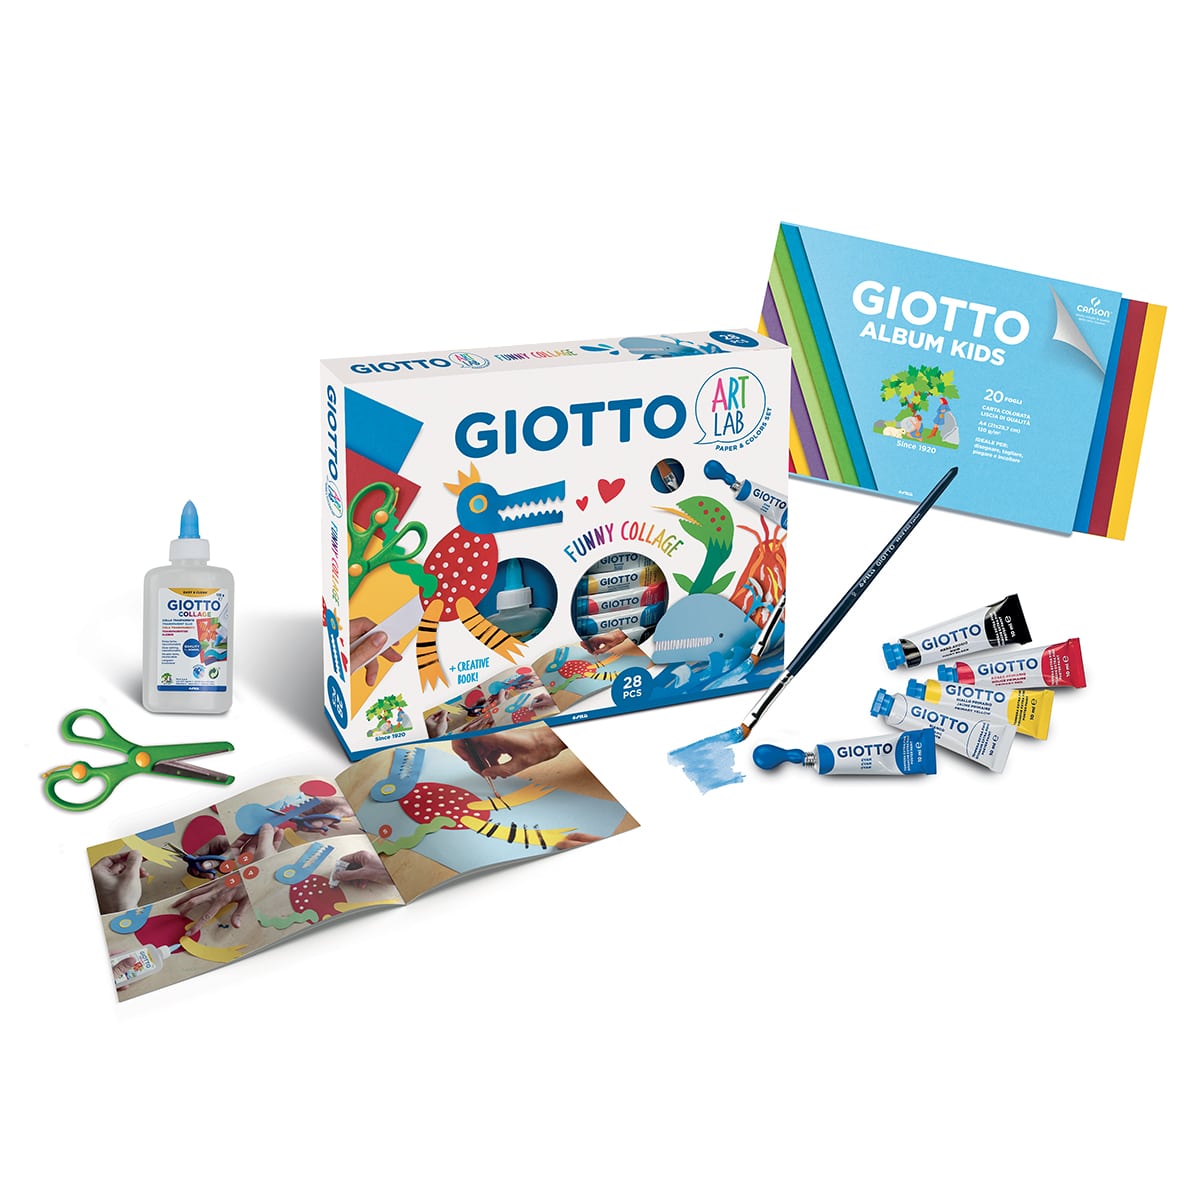 Set Manualidades Giotto. Art Labs Funny Collage